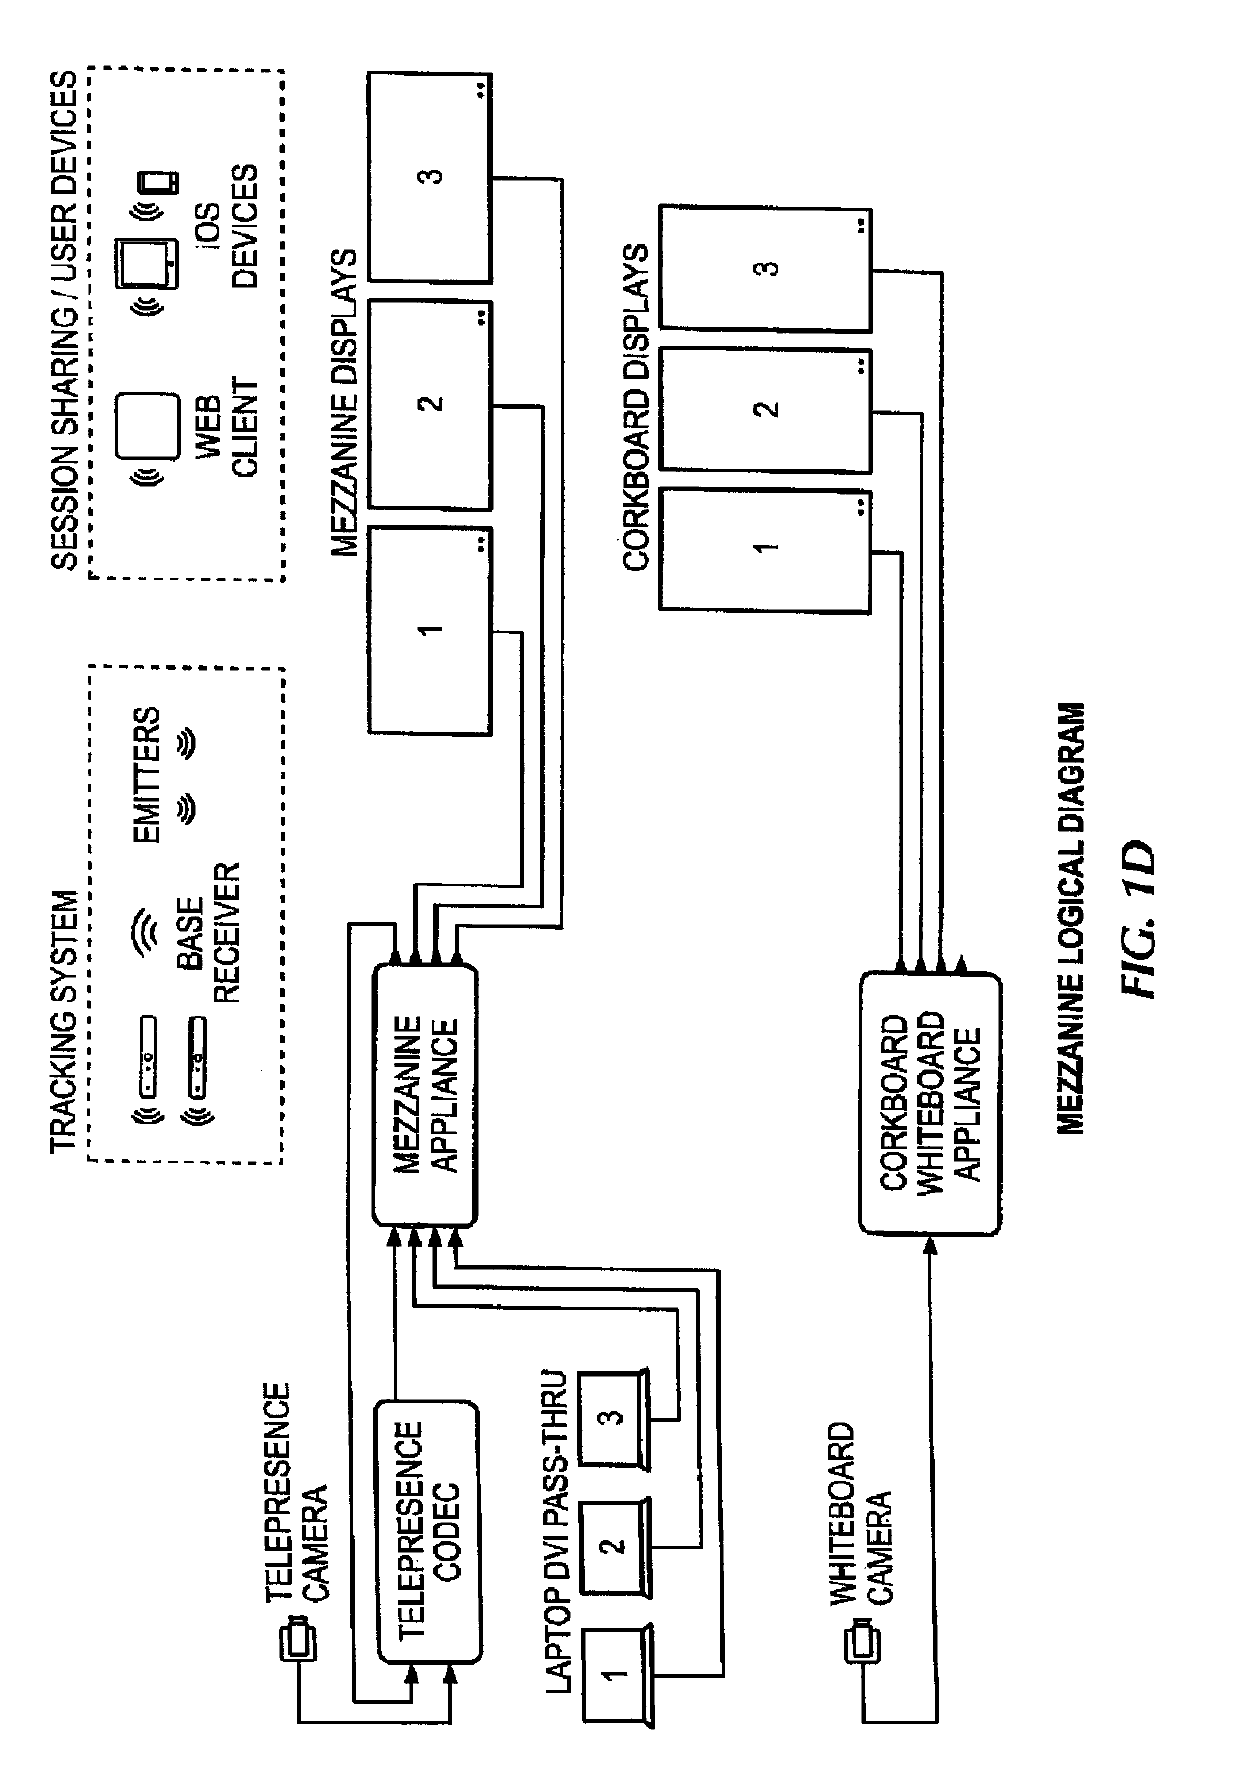 Operating environment with gestural control and multiple client devices, displays, and users